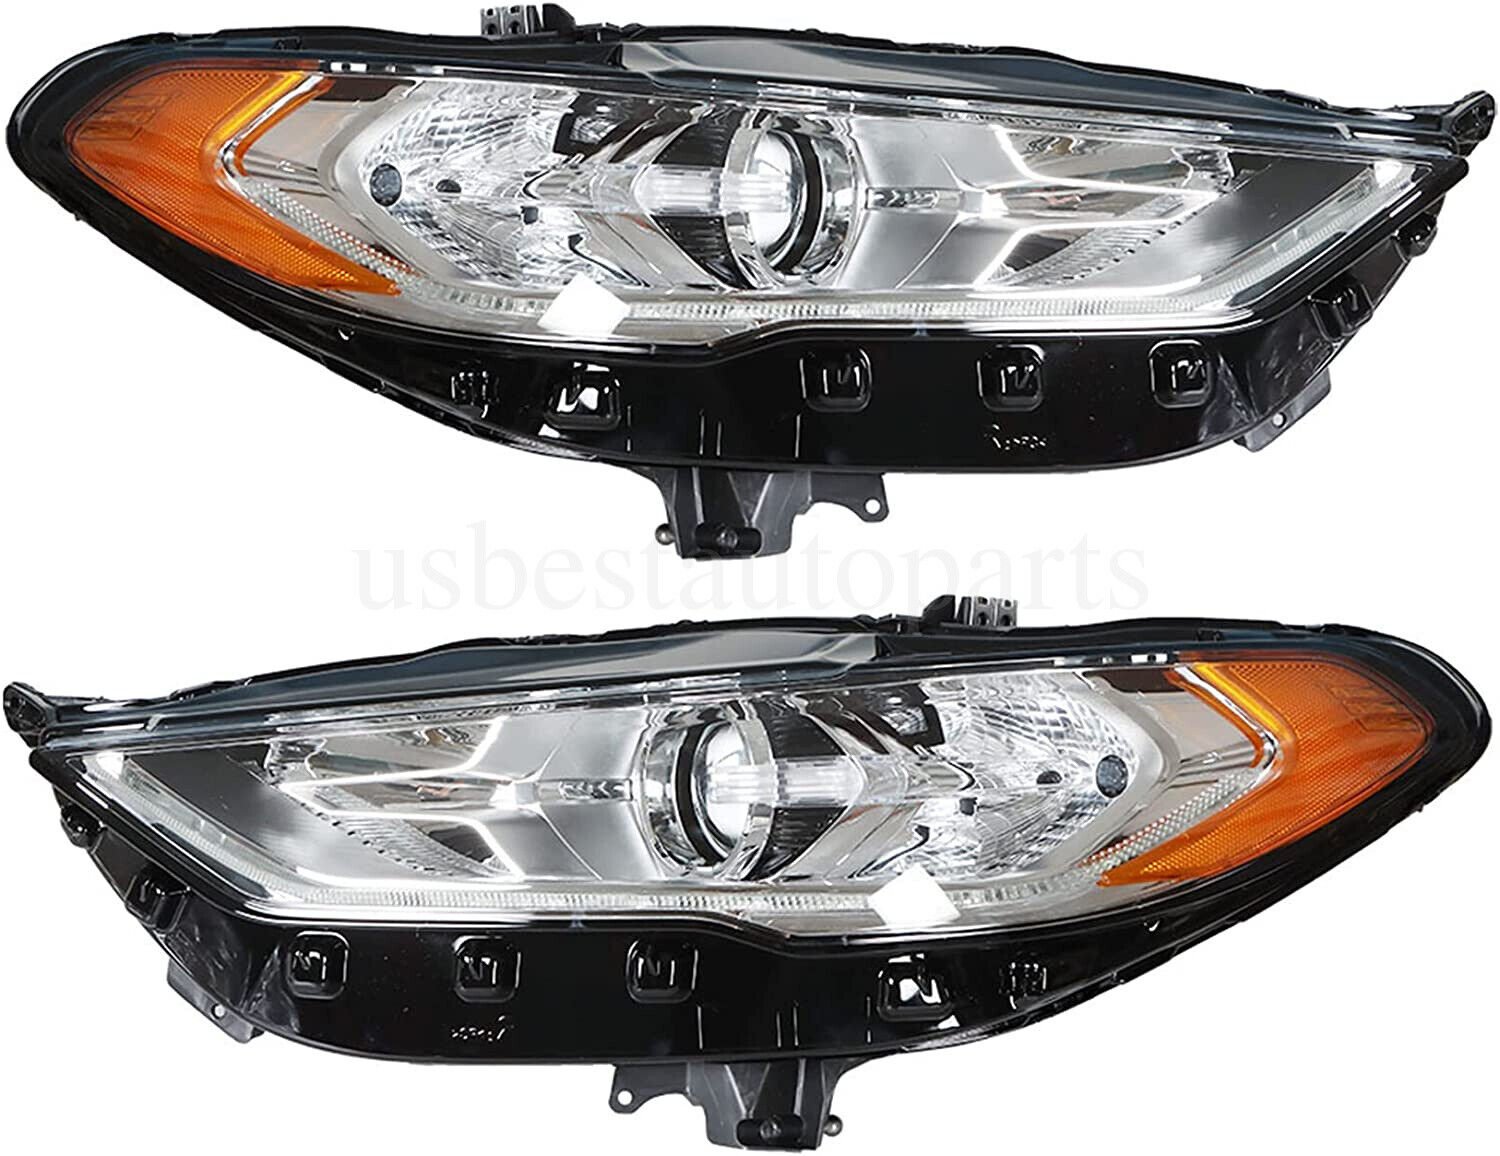 Headlamp Headlight Pair LH RH W/LED DRL Projector For 2017-2020 Ford Fusion